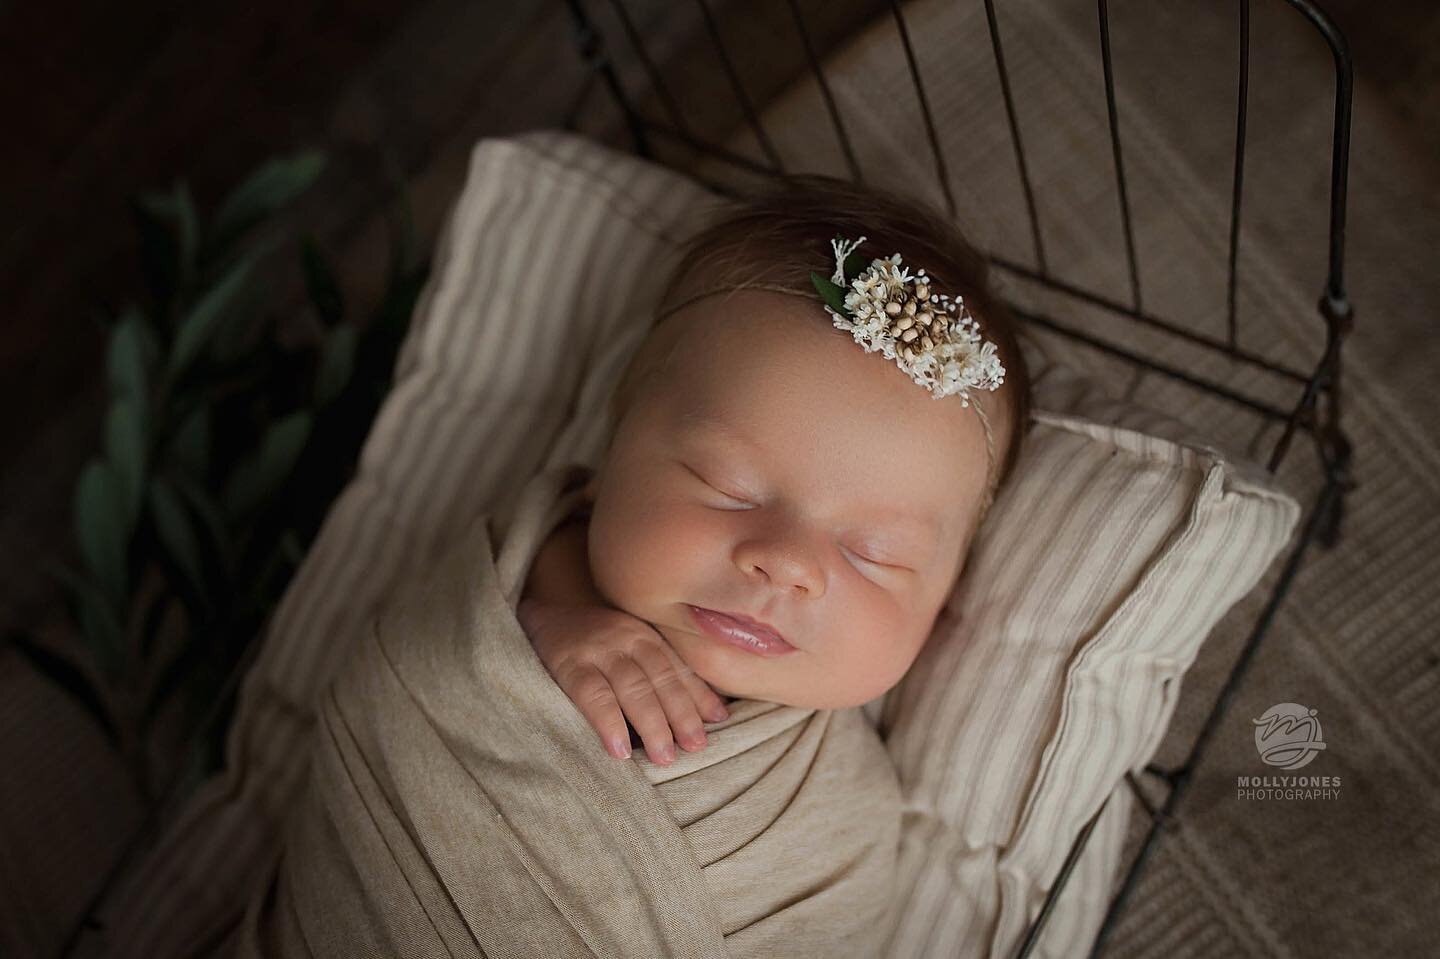 Elliott Noelle was a DREAM to photograph. I seriously get to photograph the most beautiful babies! &hearts;️